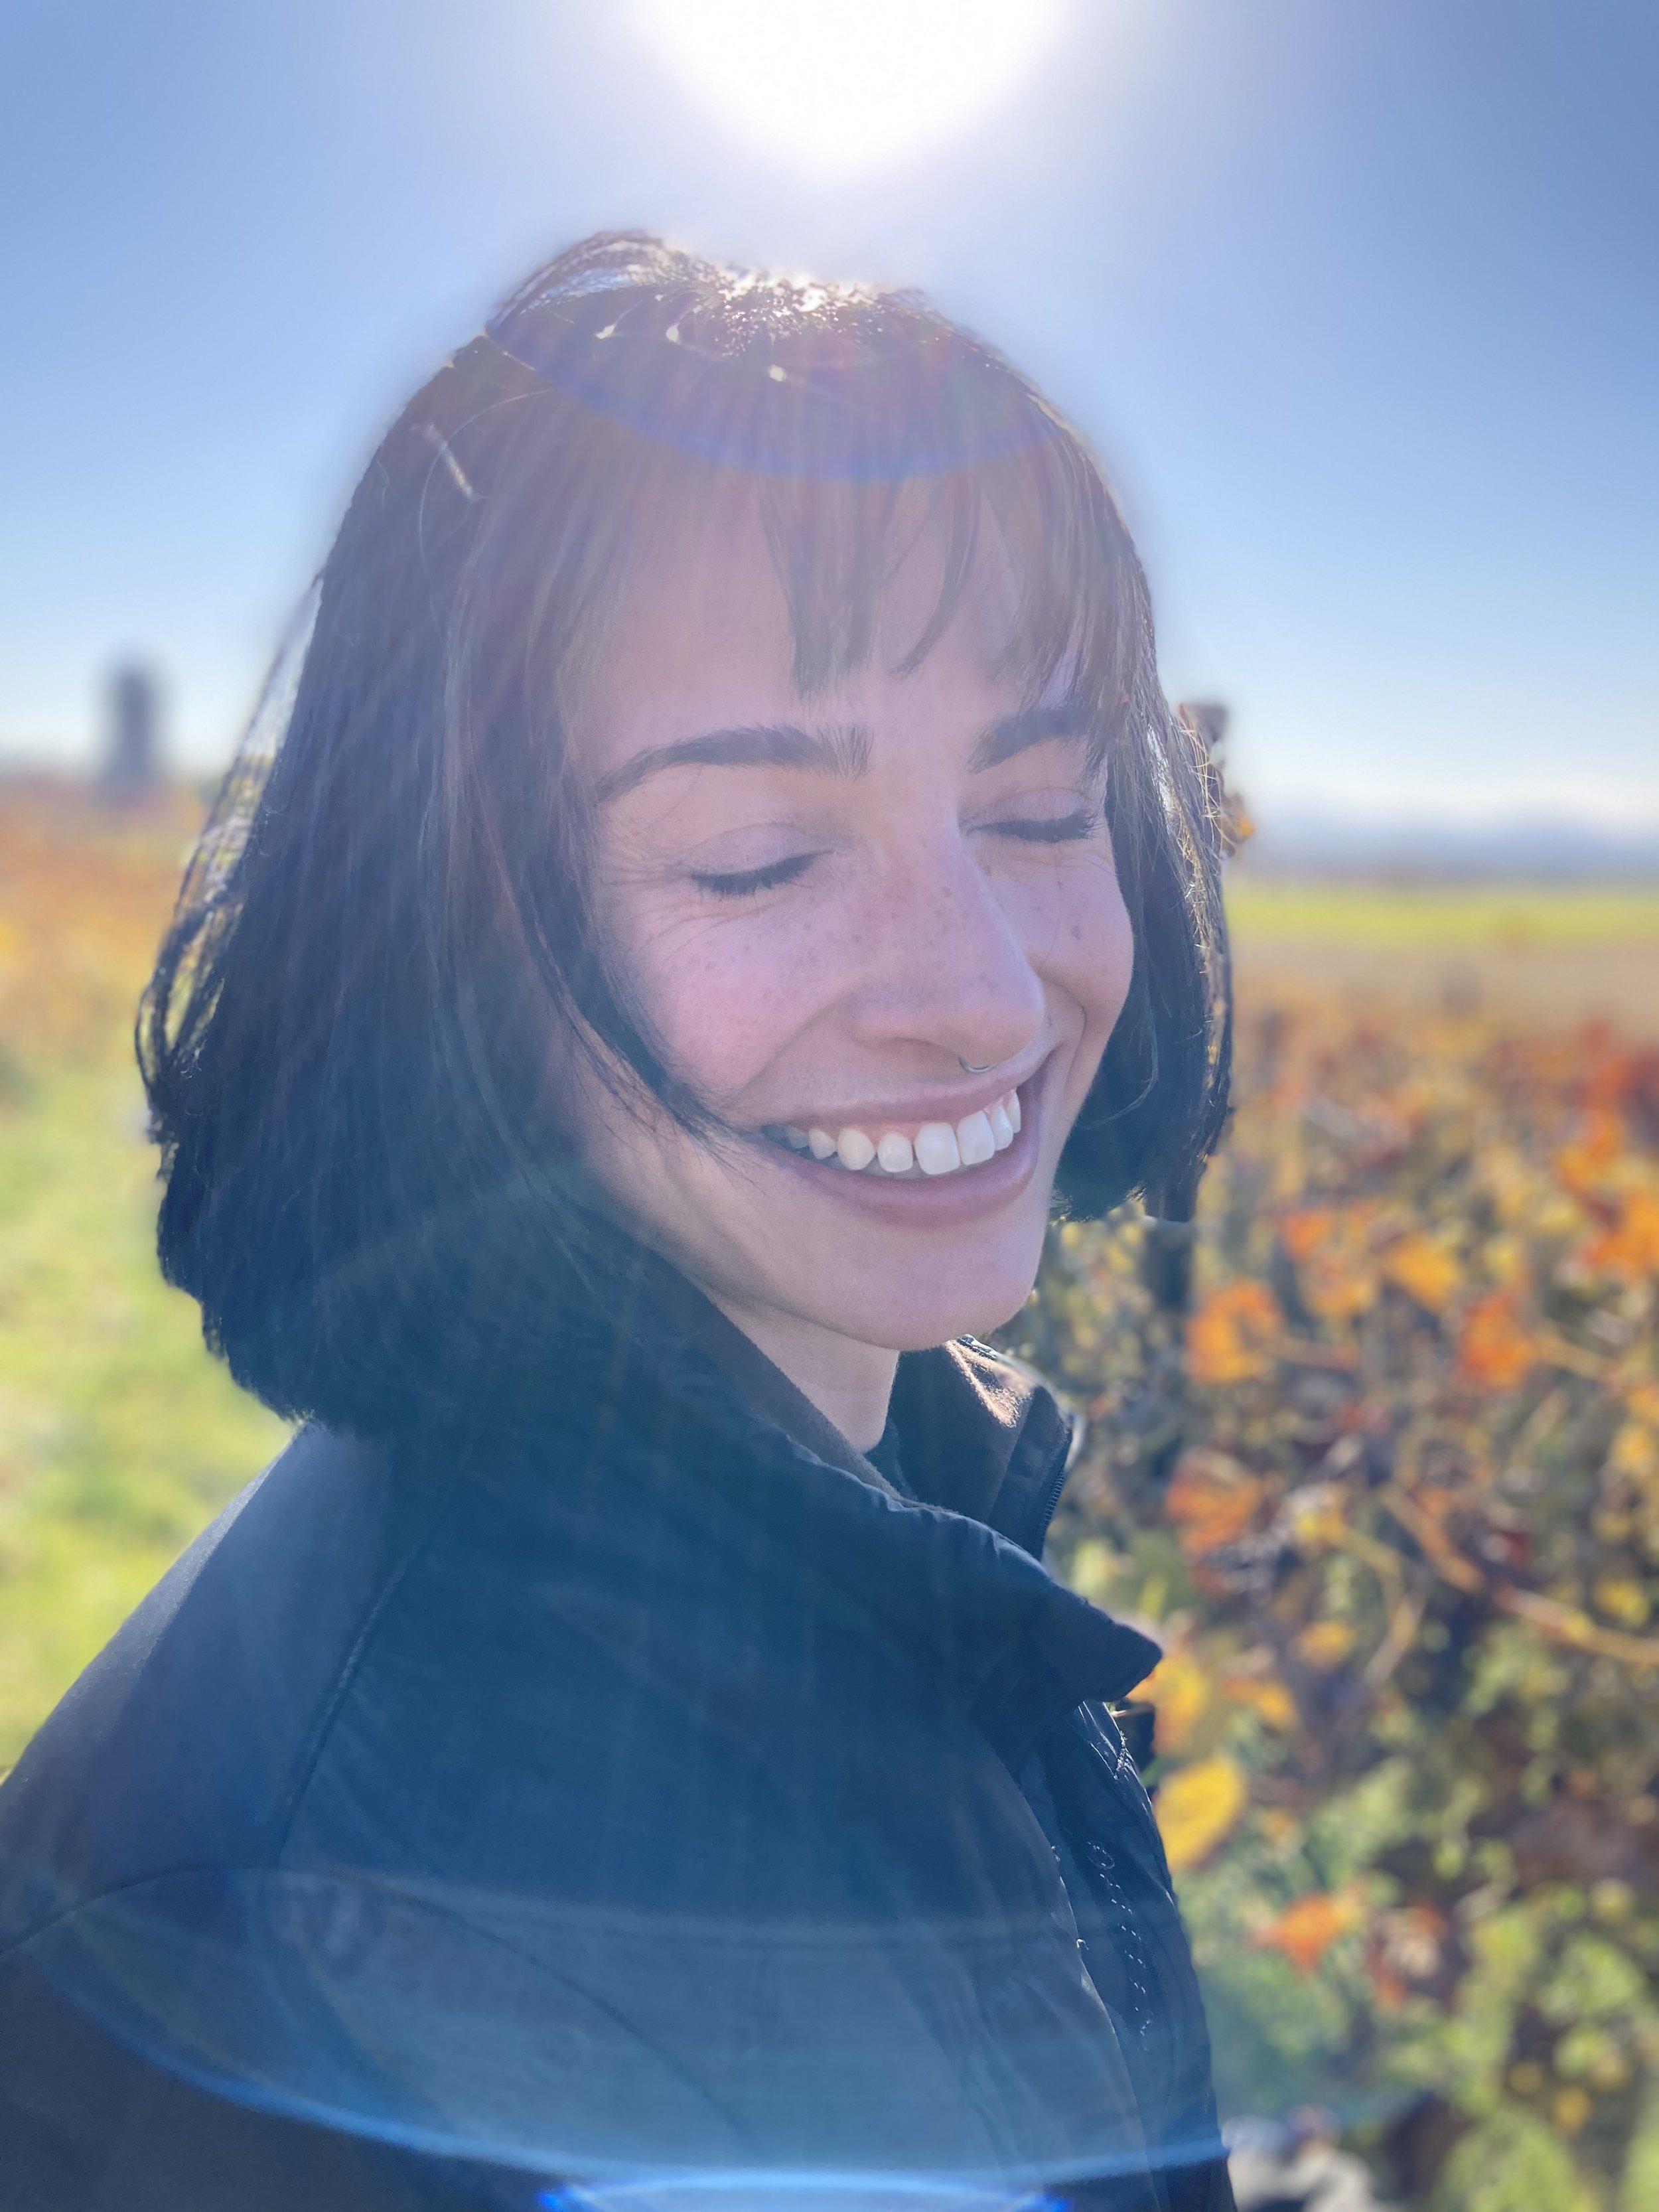 photo of Anna with eyes closed in VG vineyard by Katie Lenhart.jpg